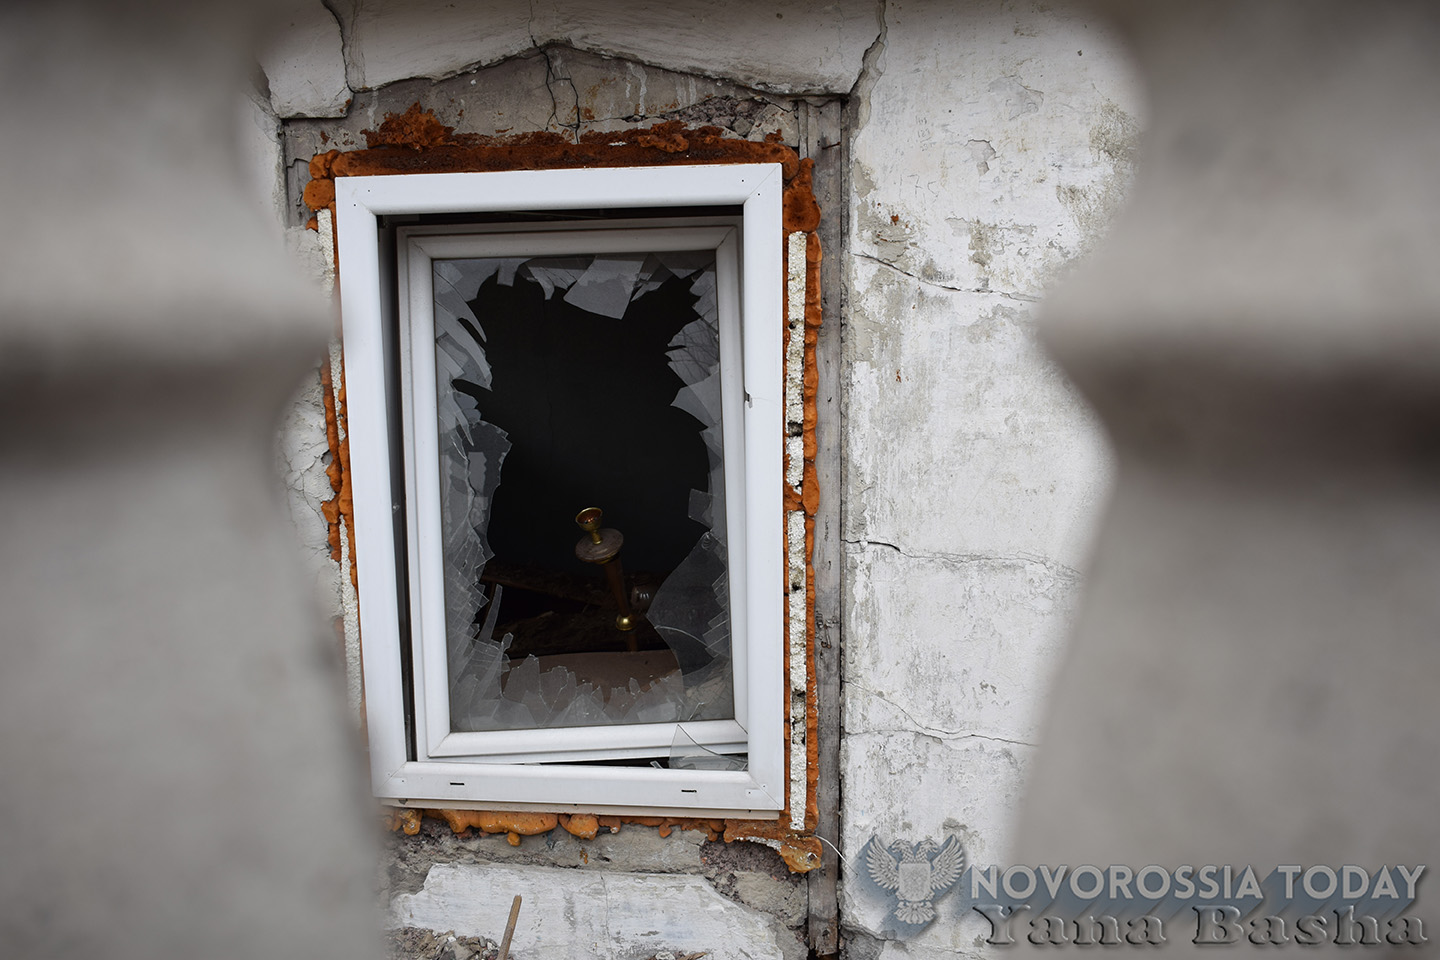 AFU keeps on violating the ceasefire in Donbass